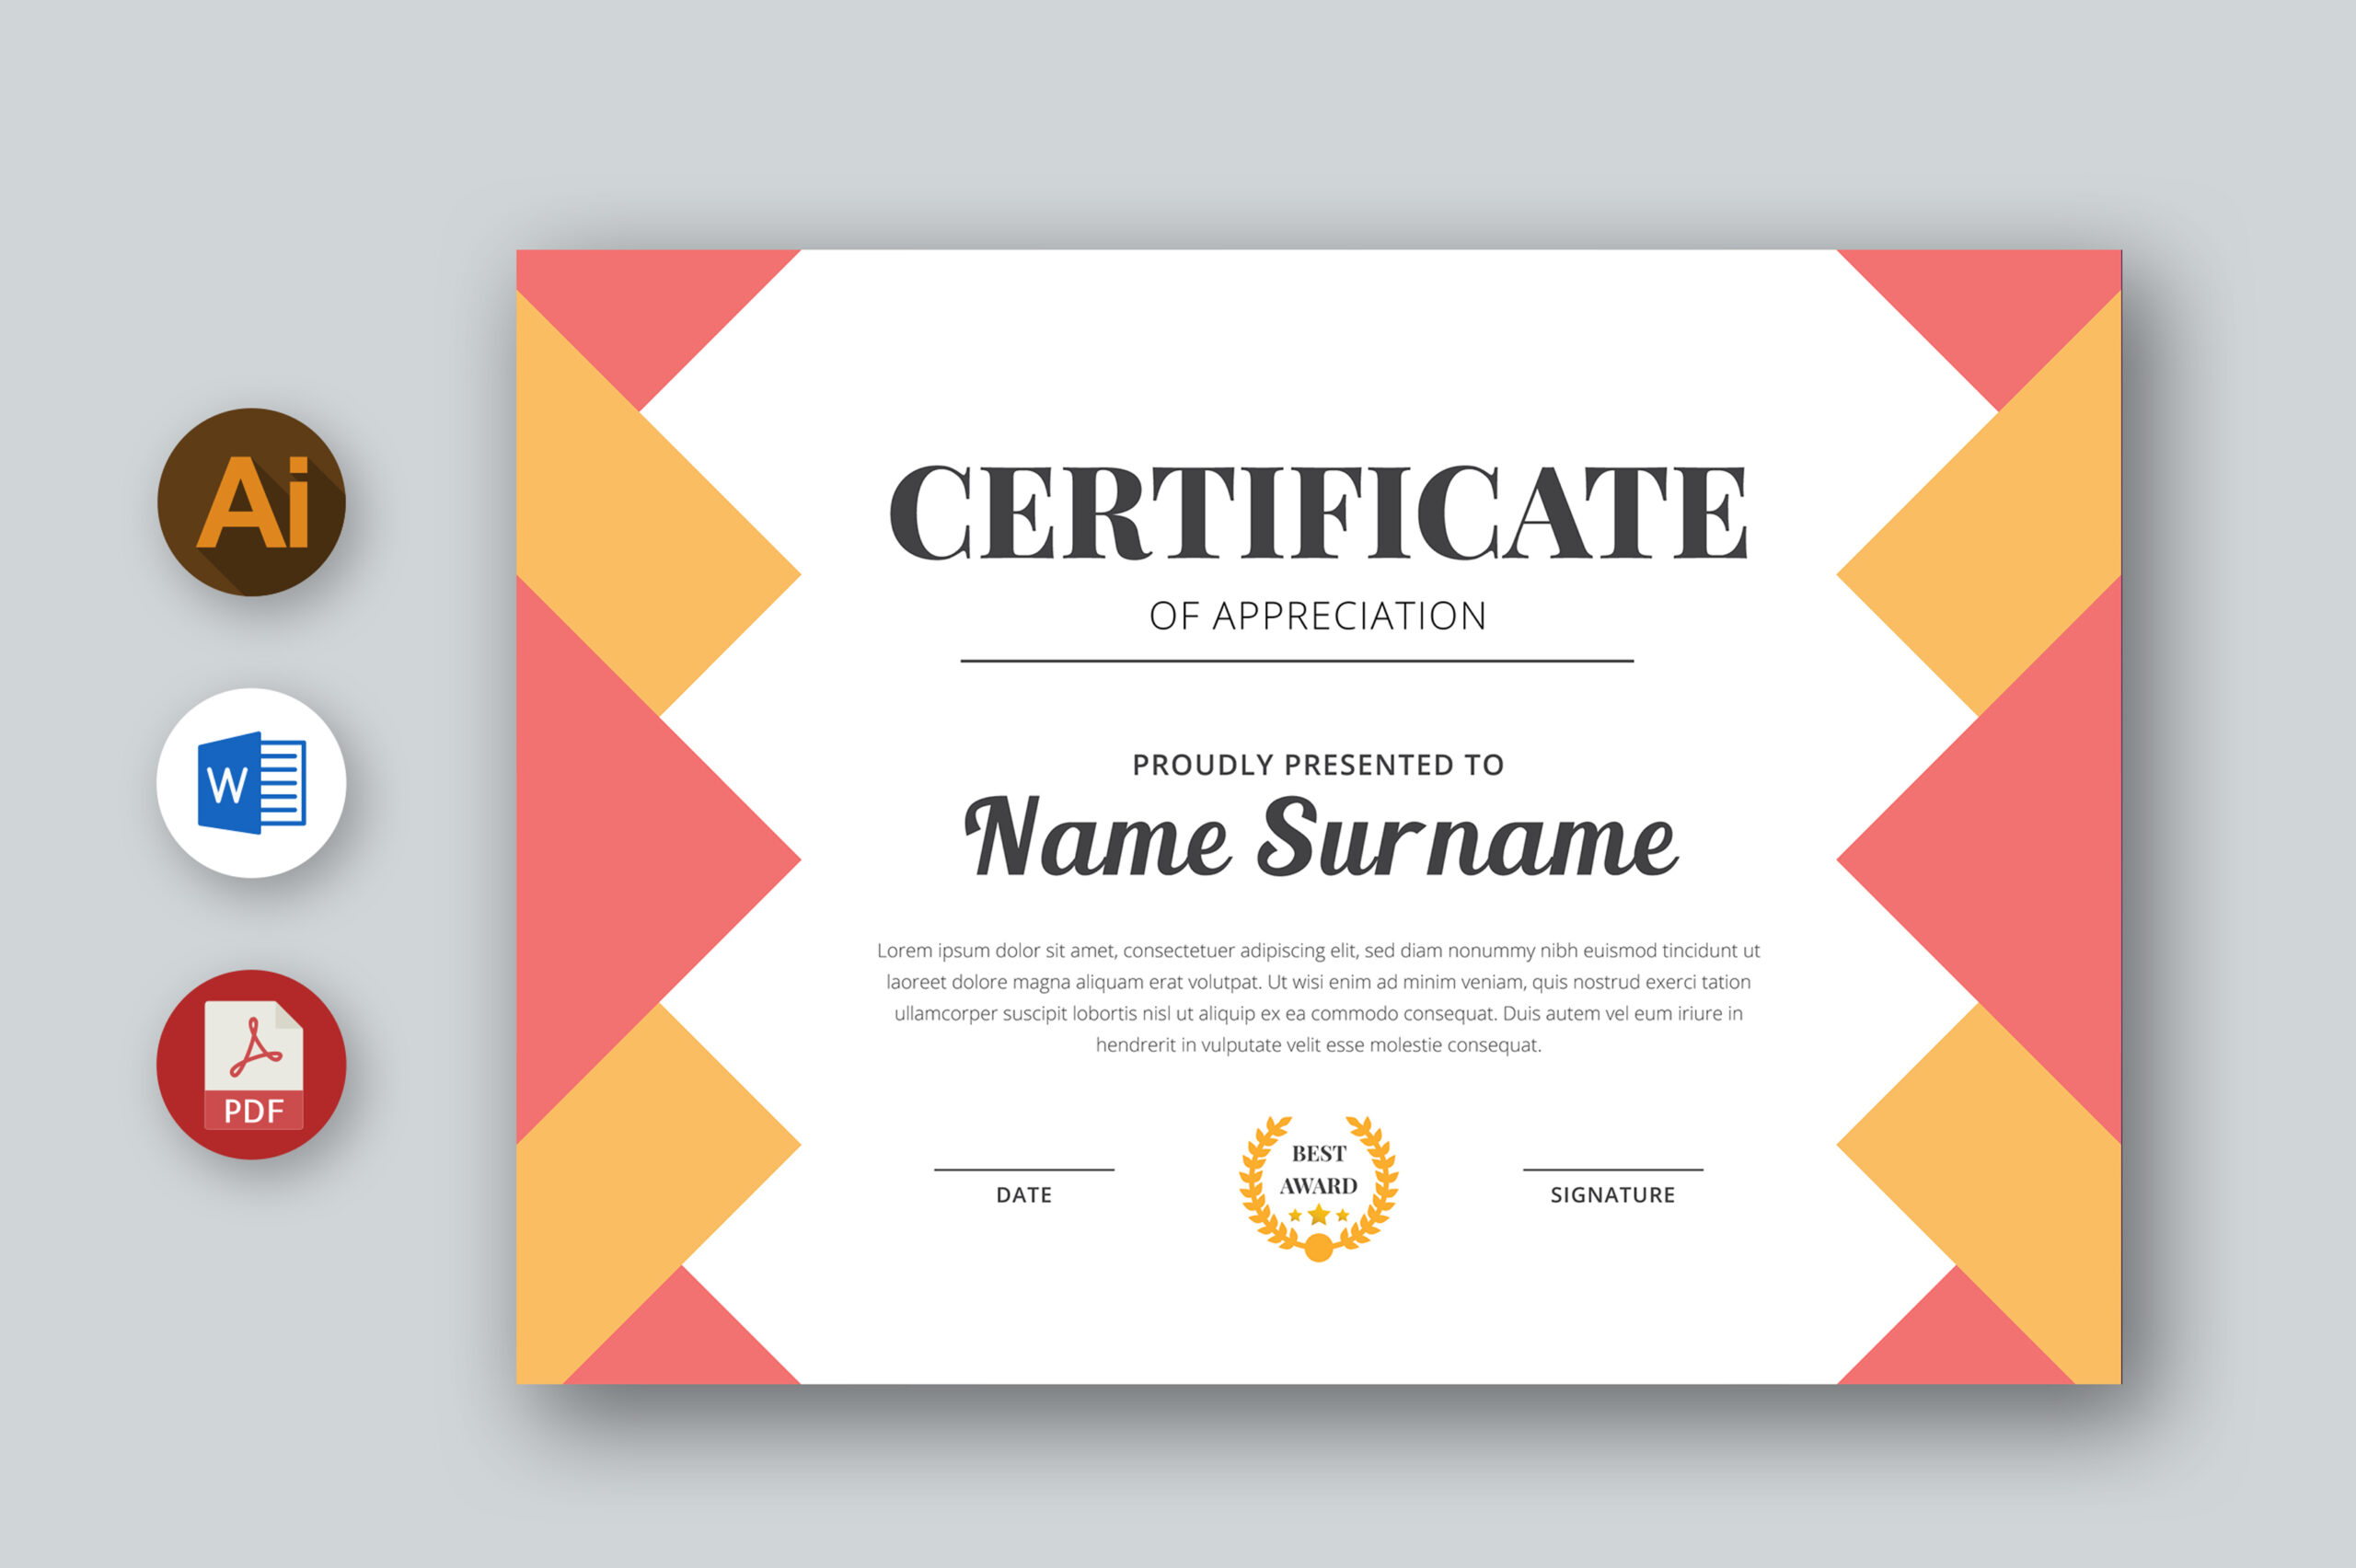 MS Word Certificate Template With Microsoft Word Award Certificate Template